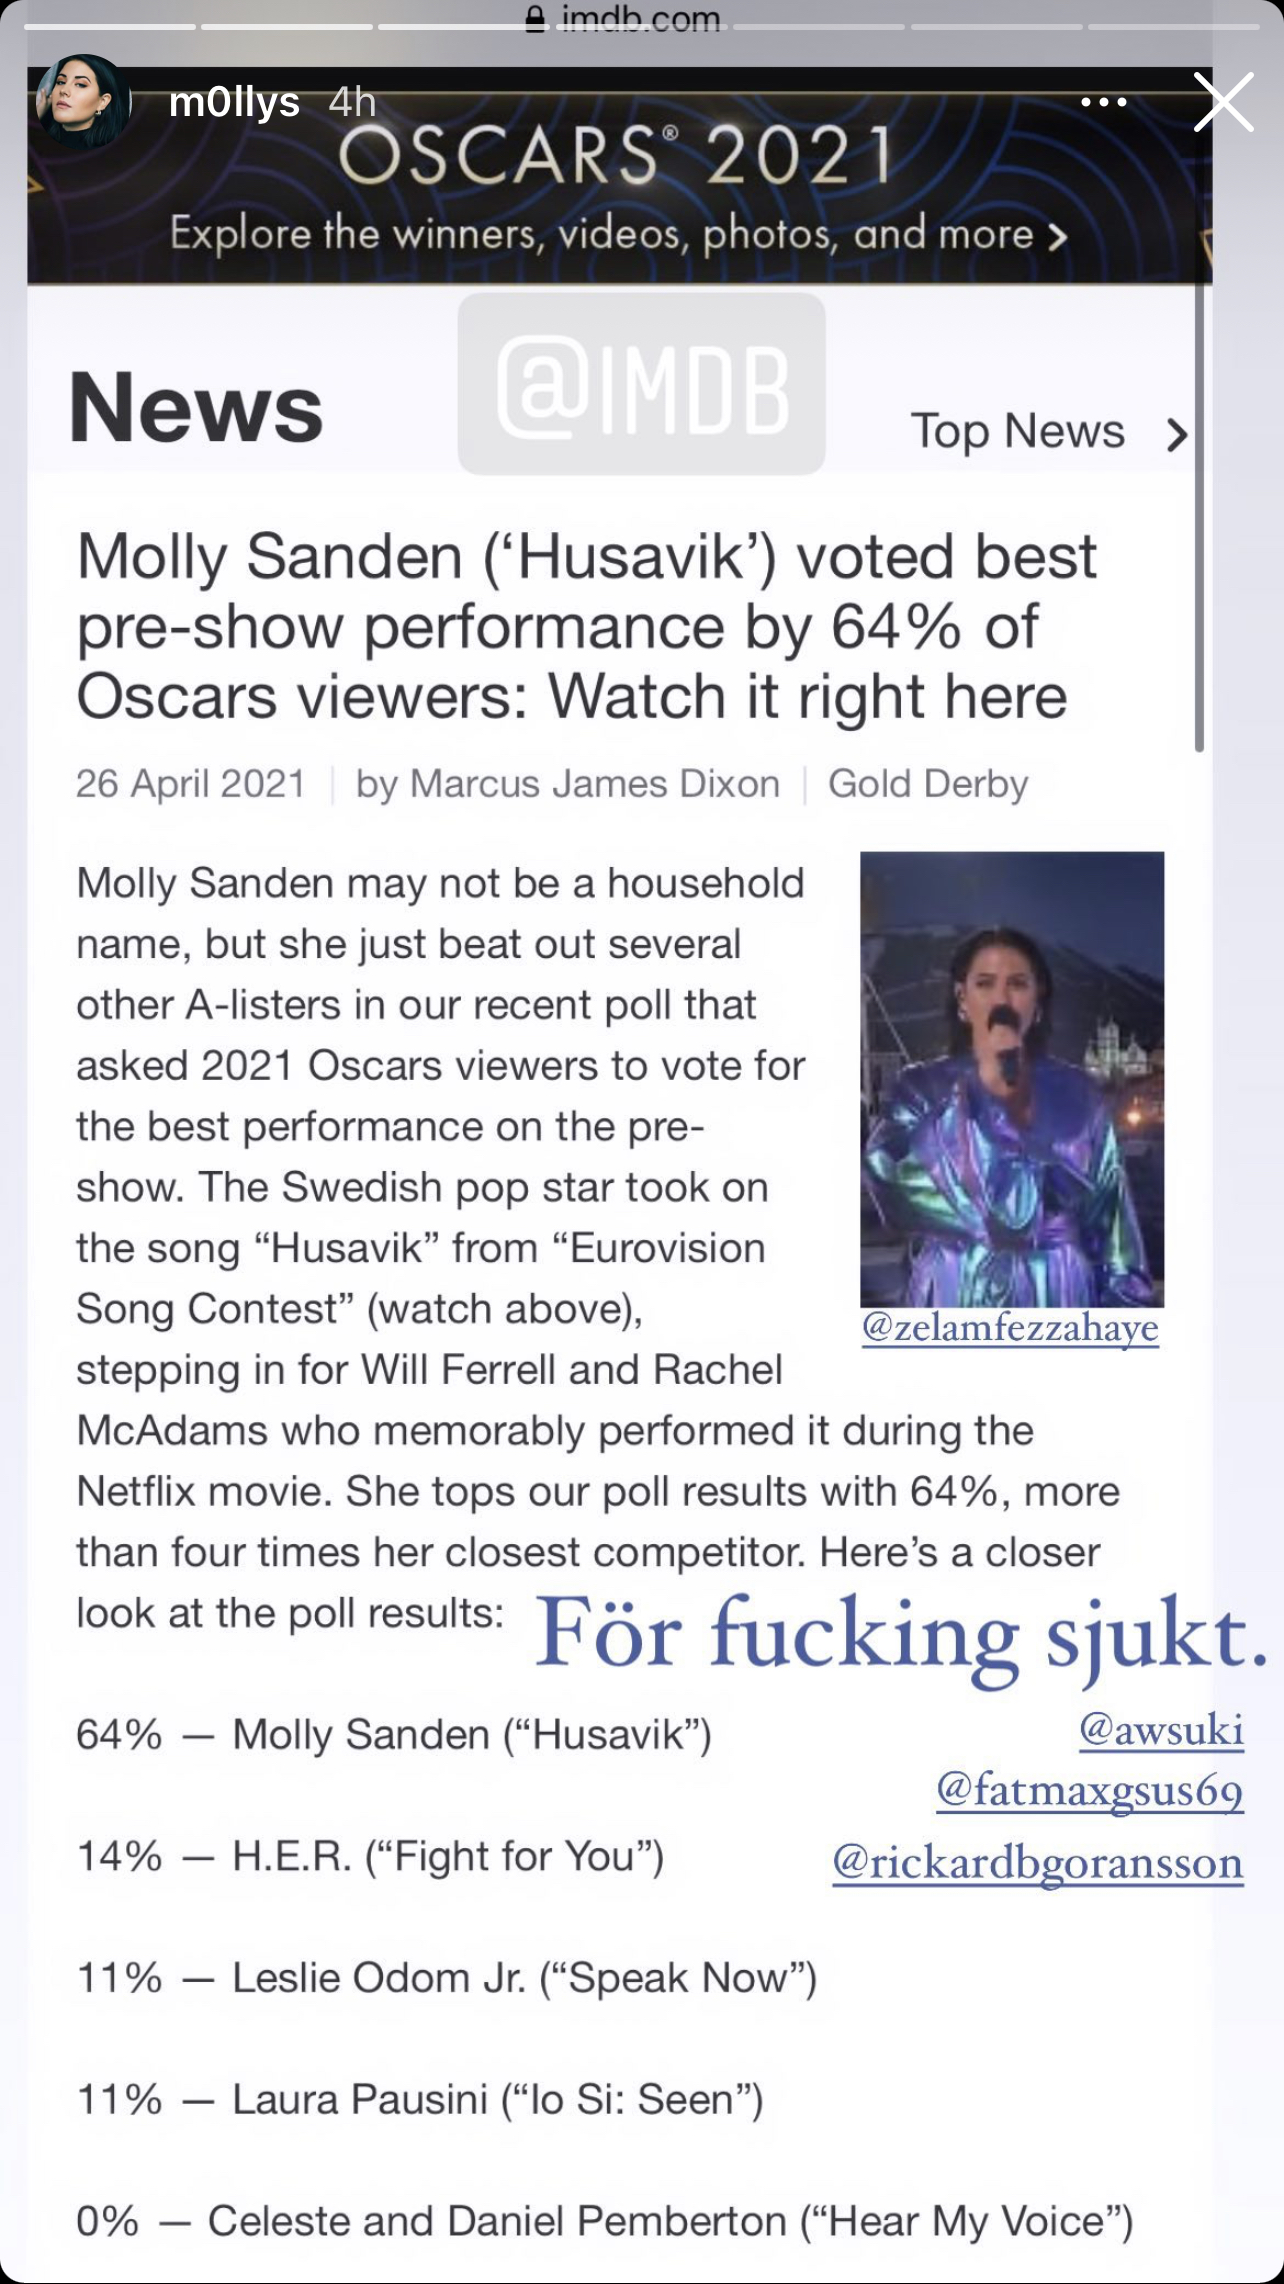 Molly Sanden (‘Husavik’) voted best pre-show performance by 64% of Oscars viewers: Watch it right here 26 April 2021 by Marcus James Dixon Gold Derby Molly Sanden (‘Husavik’) voted best pre-show performance by 64% of Oscars viewers: Watch it right here Molly Sanden may not be a household name, but she just beat out several other A-listers in our recent poll that asked 2021 Oscars viewers to vote for the best performance on the pre-show. The Swedish pop star took on the song “Husavik” from “Eurovision Song Contest” (watch above), stepping in for Will Ferrell and Rachel McAdams who memorably performed it during the Netflix movie. She tops our poll results with 64%, more than four times her closest competitor. // Mollys kommentar: För fucking sjukt!